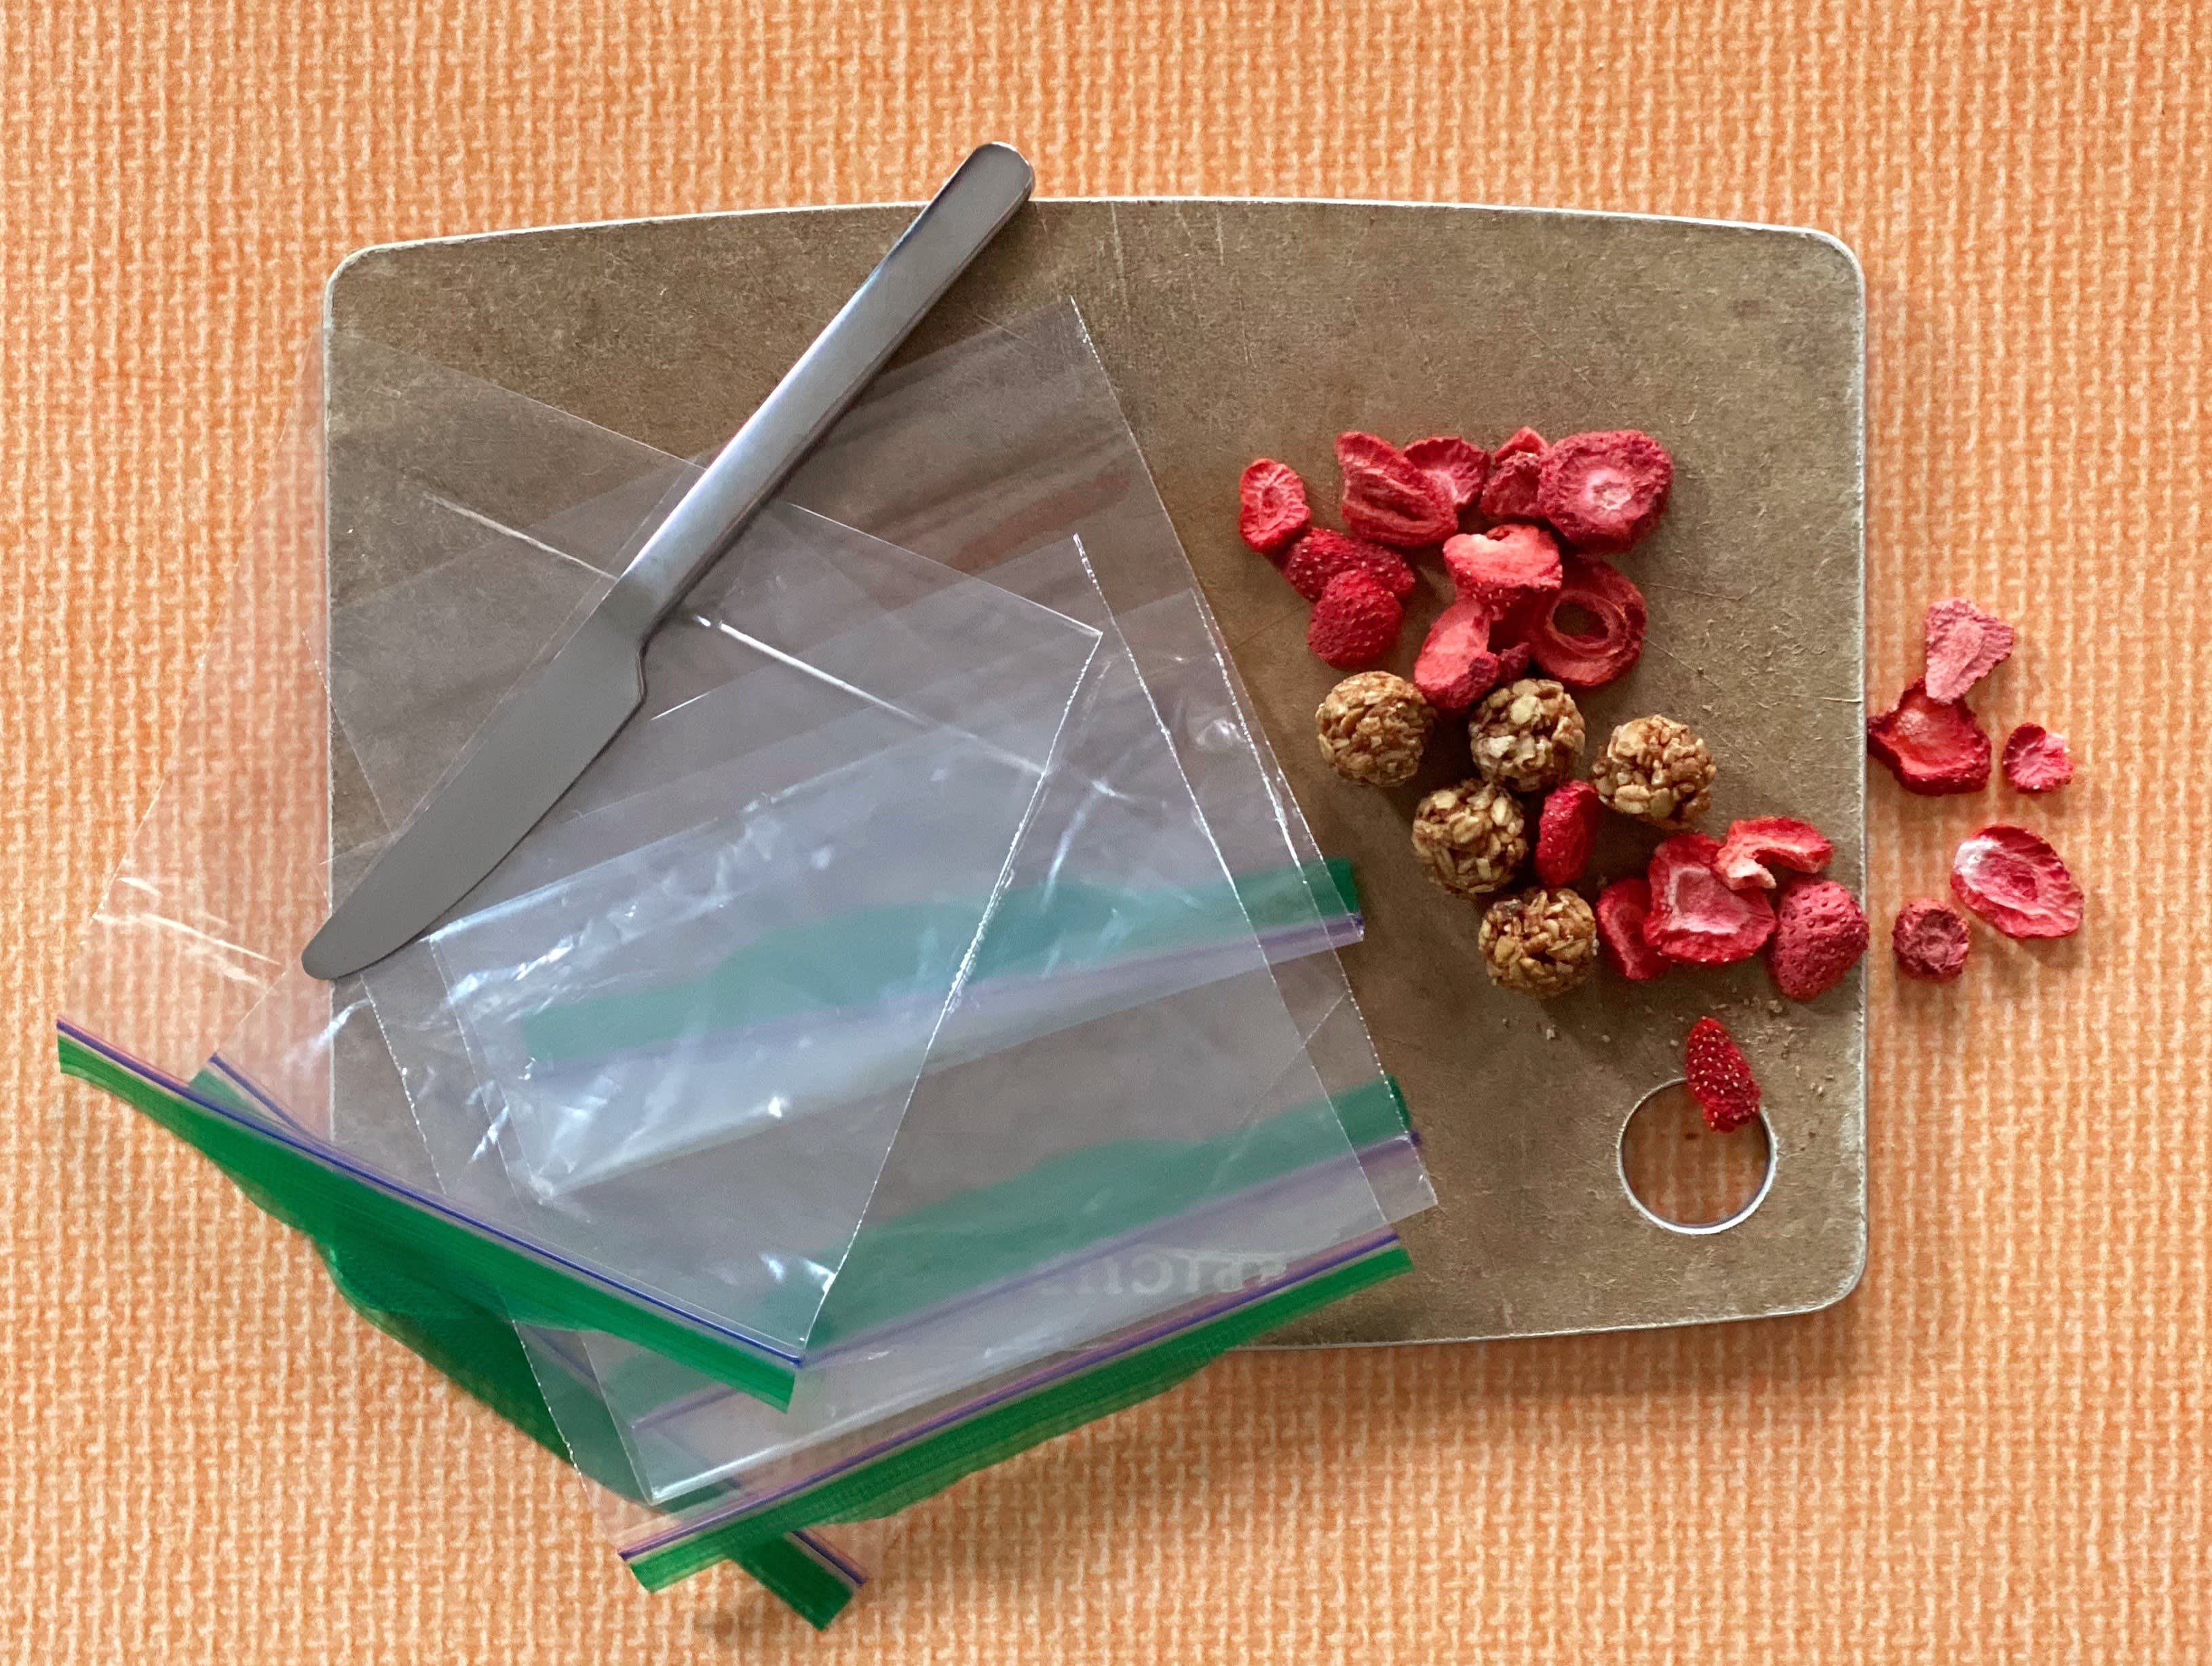 The Plastic Baggie Trick You'll Wish You Knew About Earlier